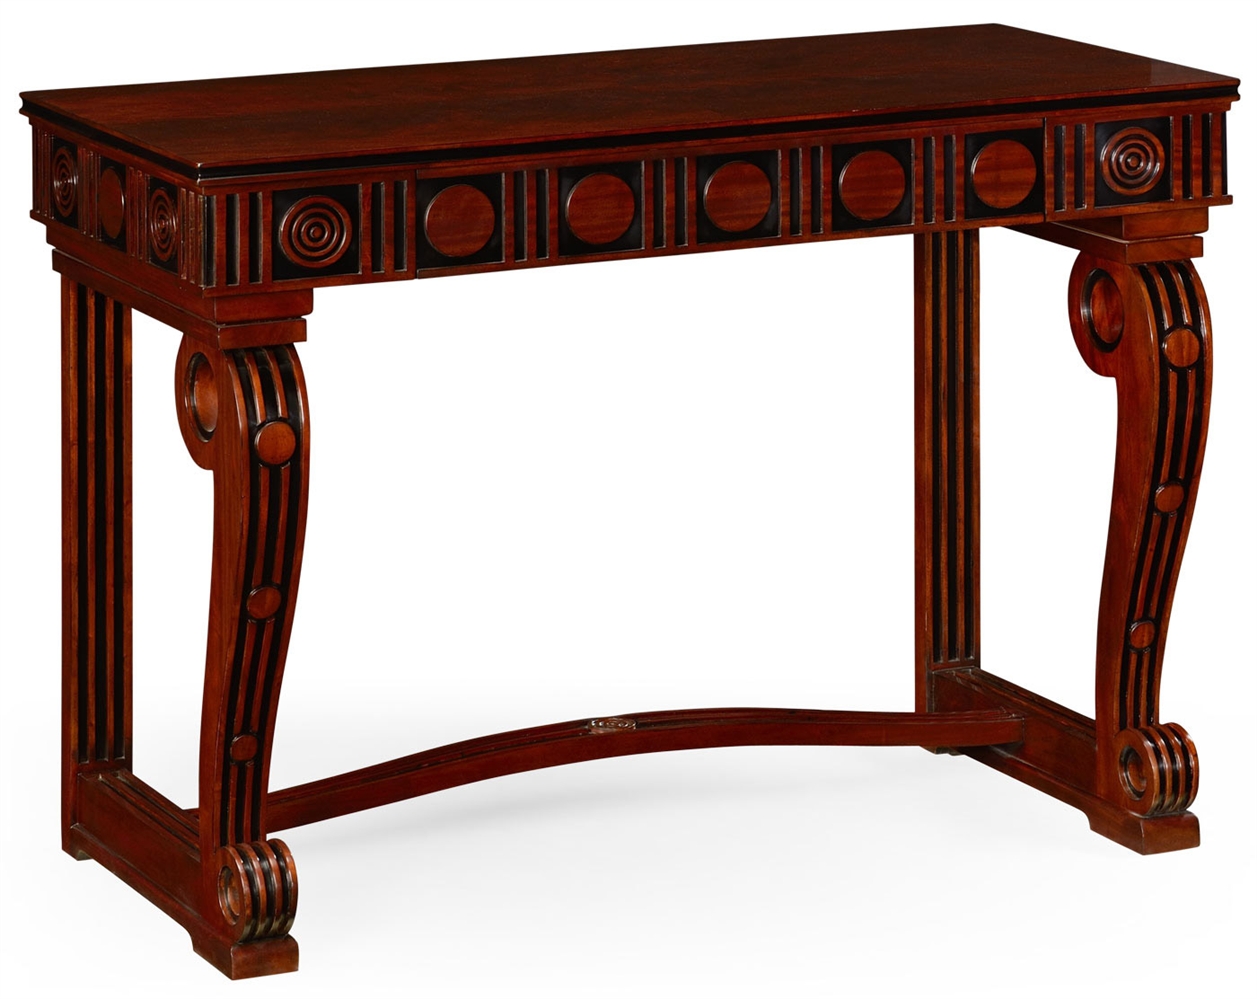 Dudley console (Rich mahogany)